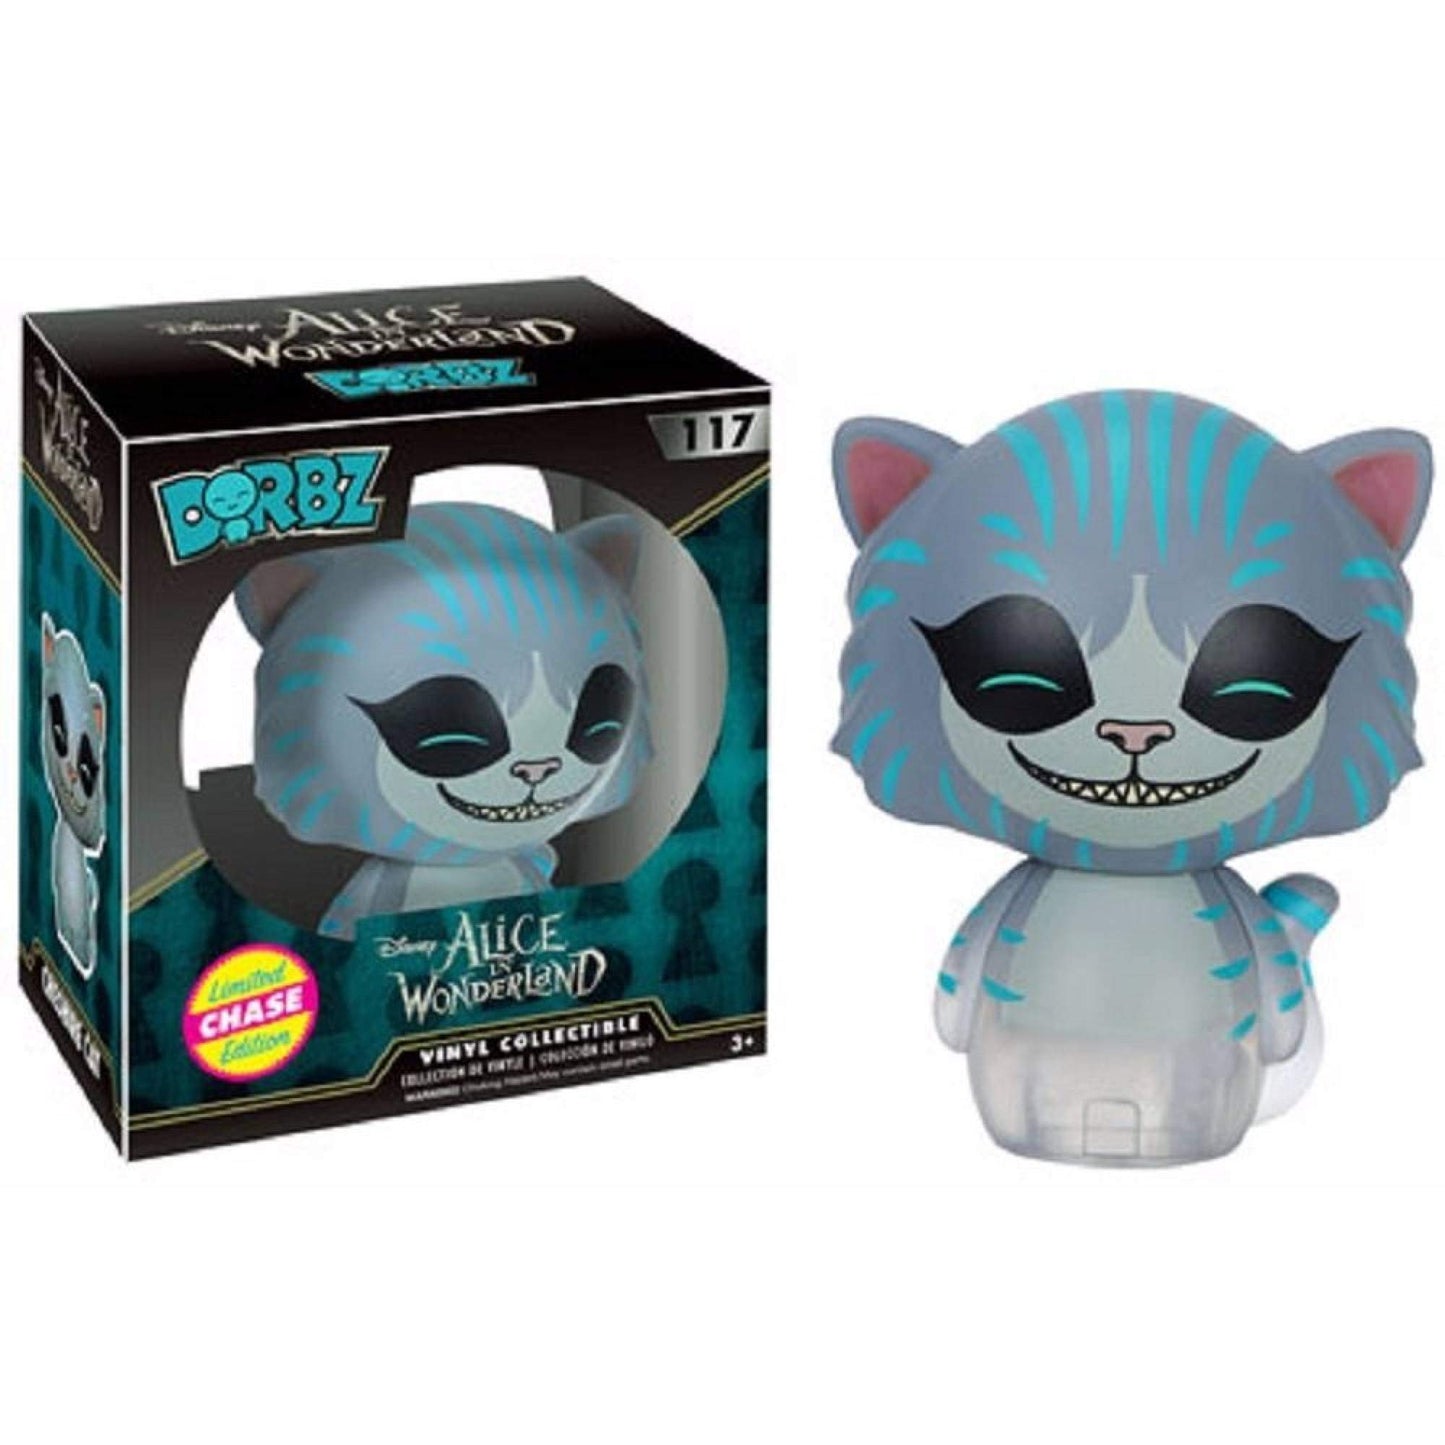 Funko Dorbz: Alice in Wonderland - CHASE Cheshire Cat [Disappearing]